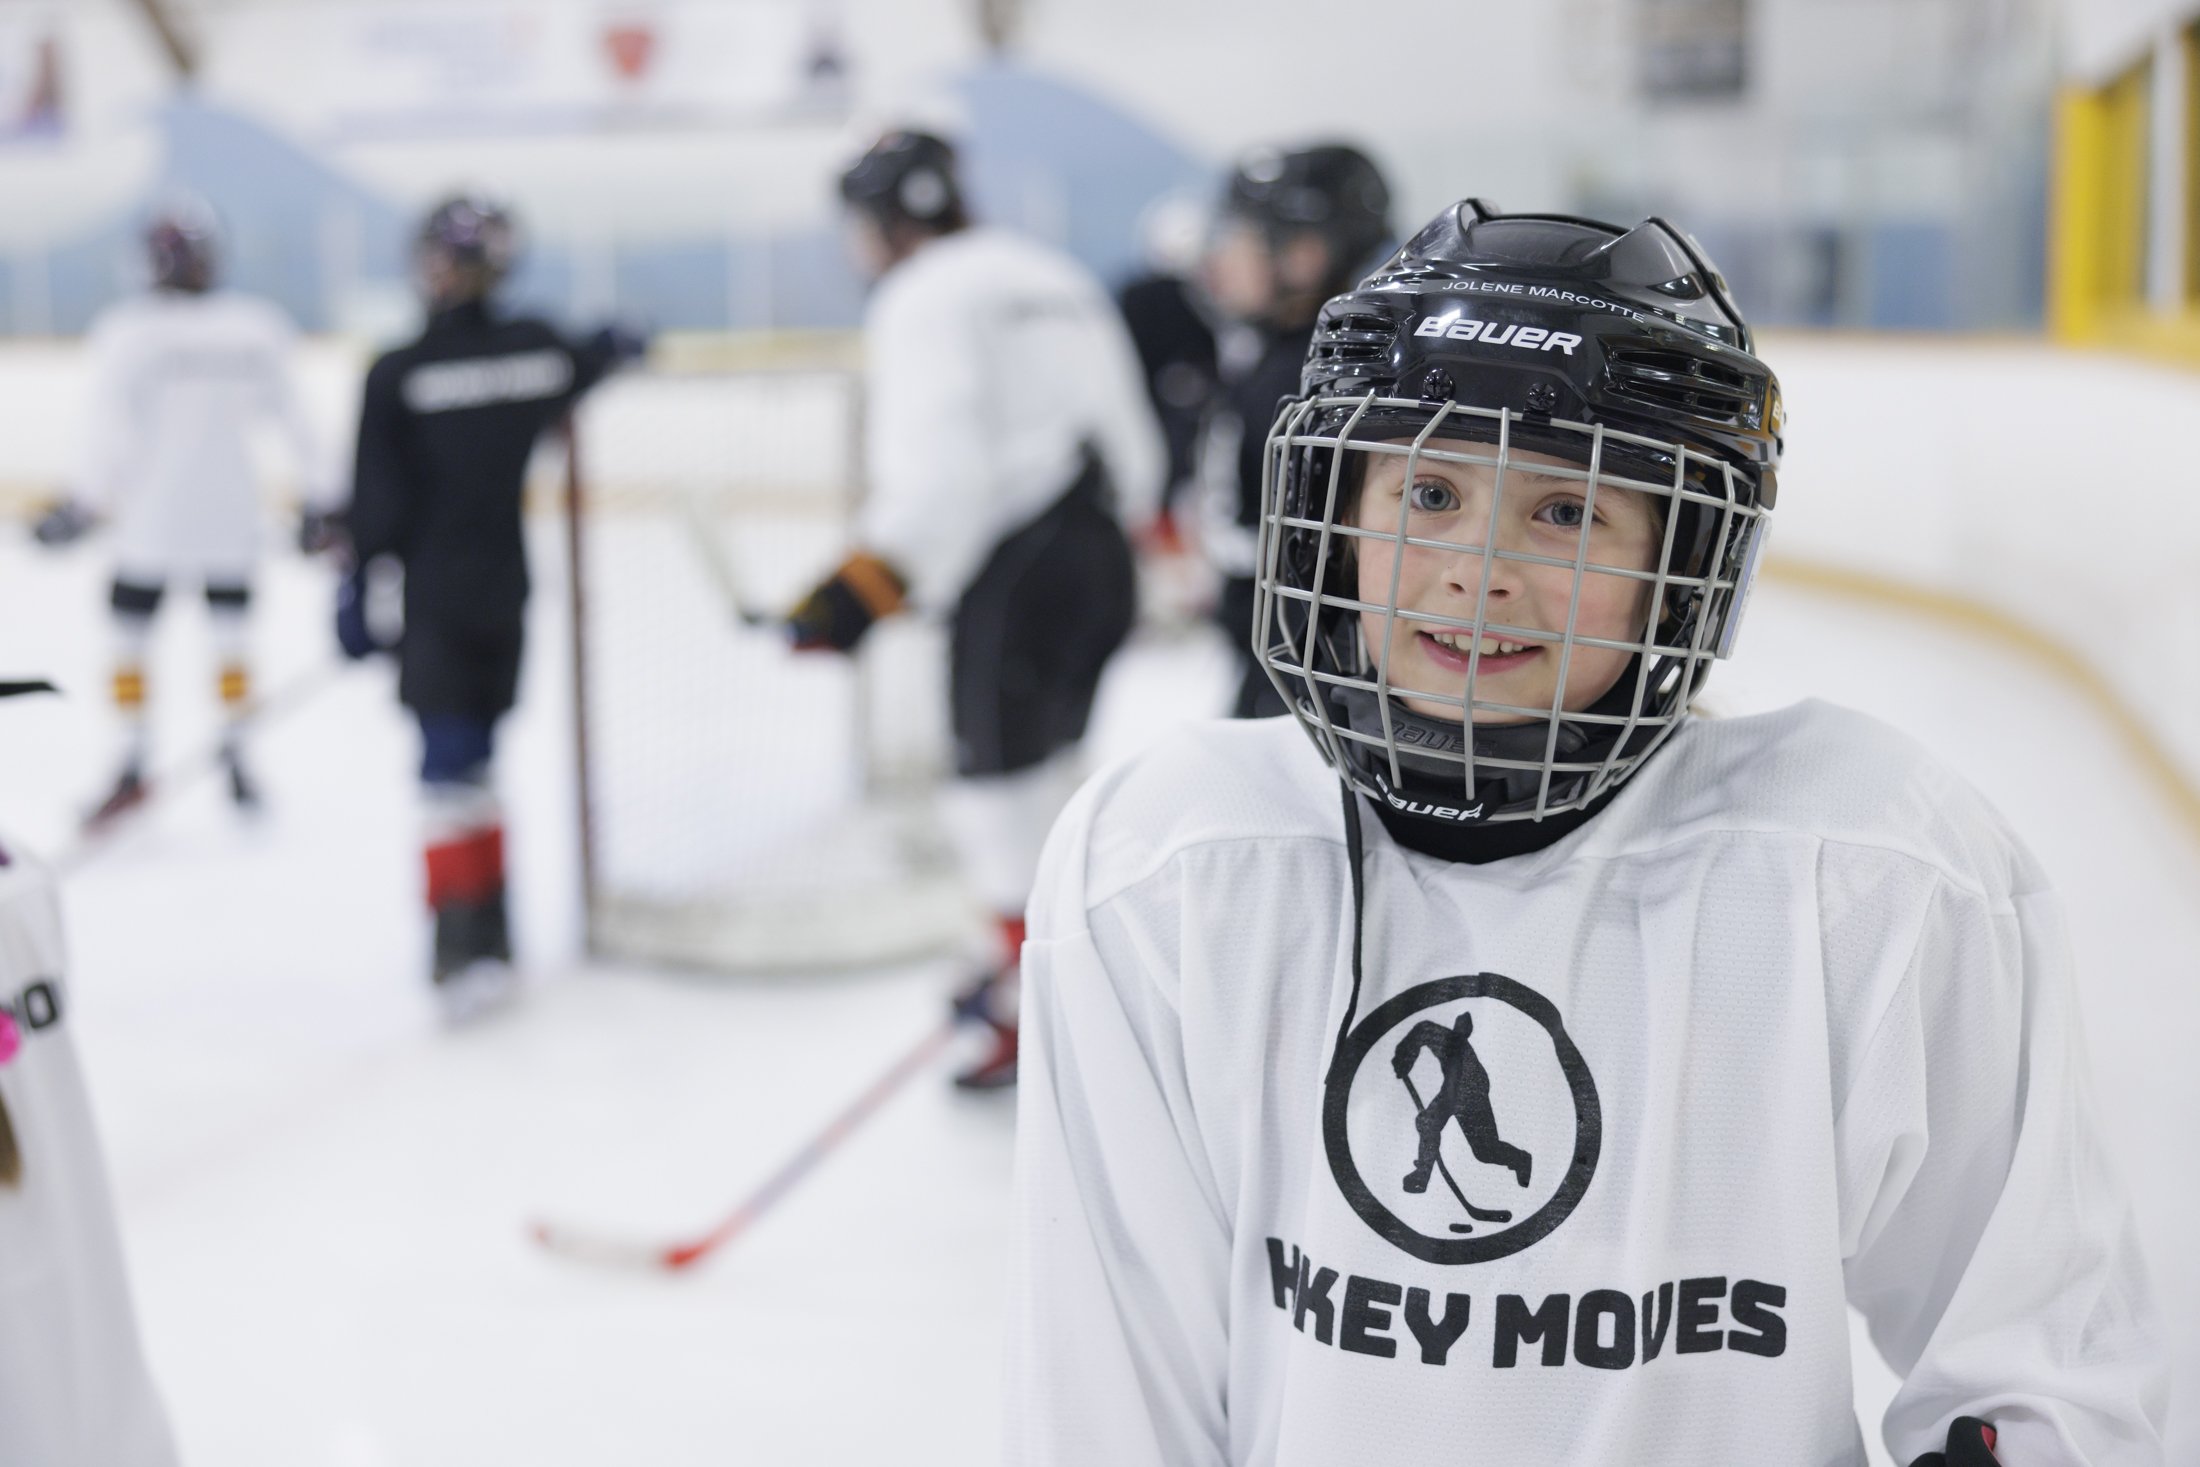 Young Hockey Moves camper smiles for the camera